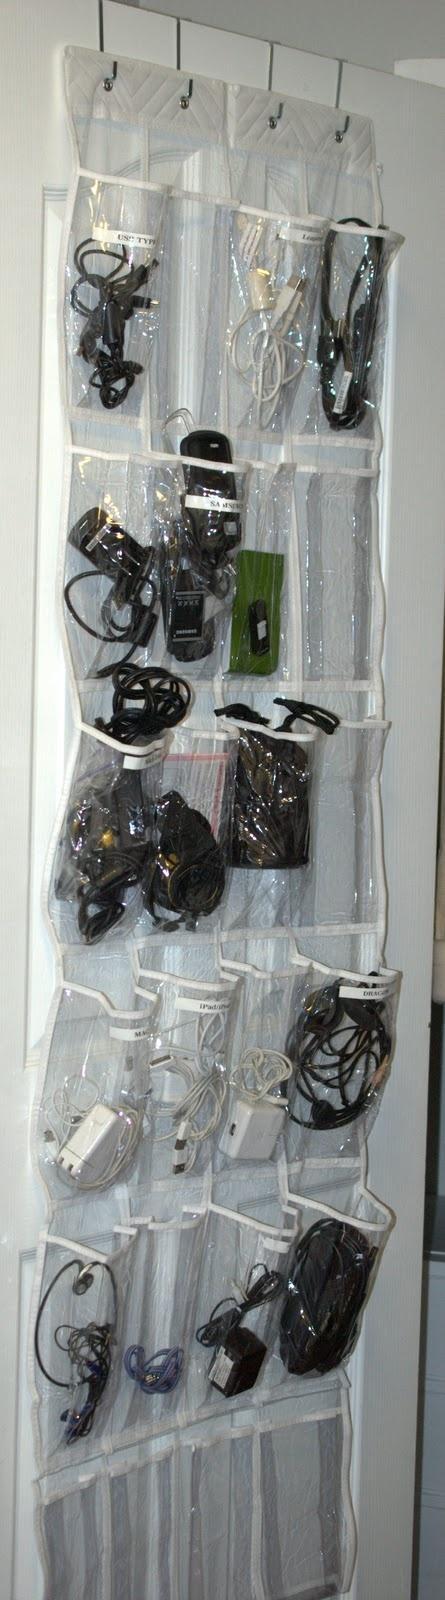 organizing various cords for your variety of electronics